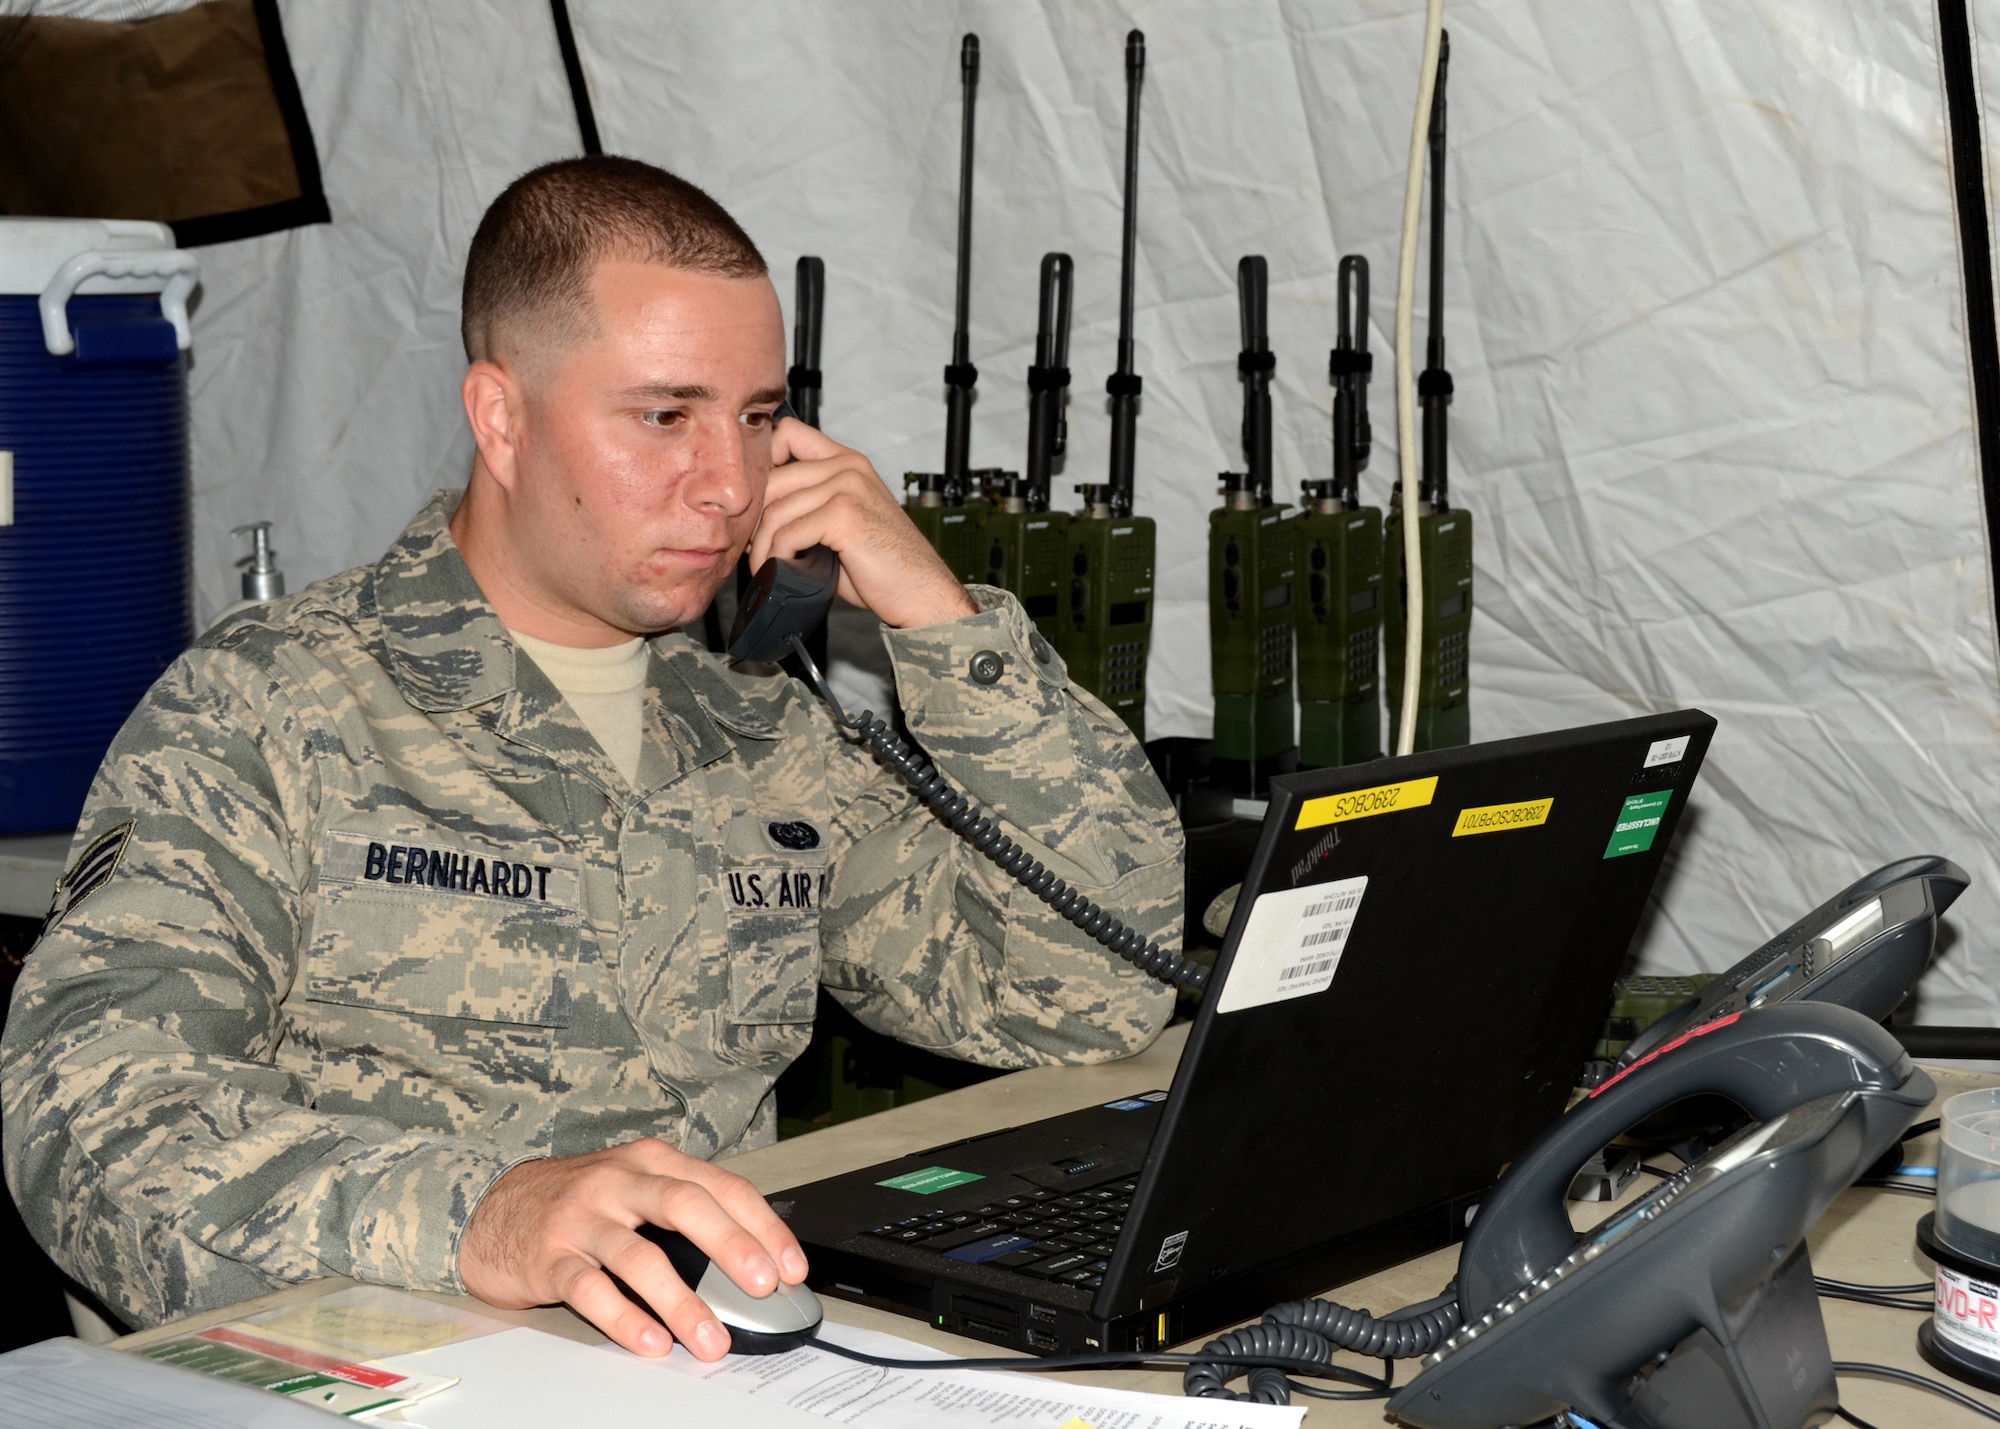 The 239th Combat Communications Squadron, Missouri Air National Guard, “deployed” from Jefferson Barracks, St. Louis, Missouri, to Whiteman Air Force Base, Missouri, for an exercise during the 131st Bomb Wing annual training week, June 16-20, 2014.   Citizen-Airmen of the 131st Bomb Wing Comptroller Flight also participated in the exercise, with members running mock scenarios while using equipment and workspace provided by the 239th. (U.S. Air National Guard photo by Airman Halley Burgess)